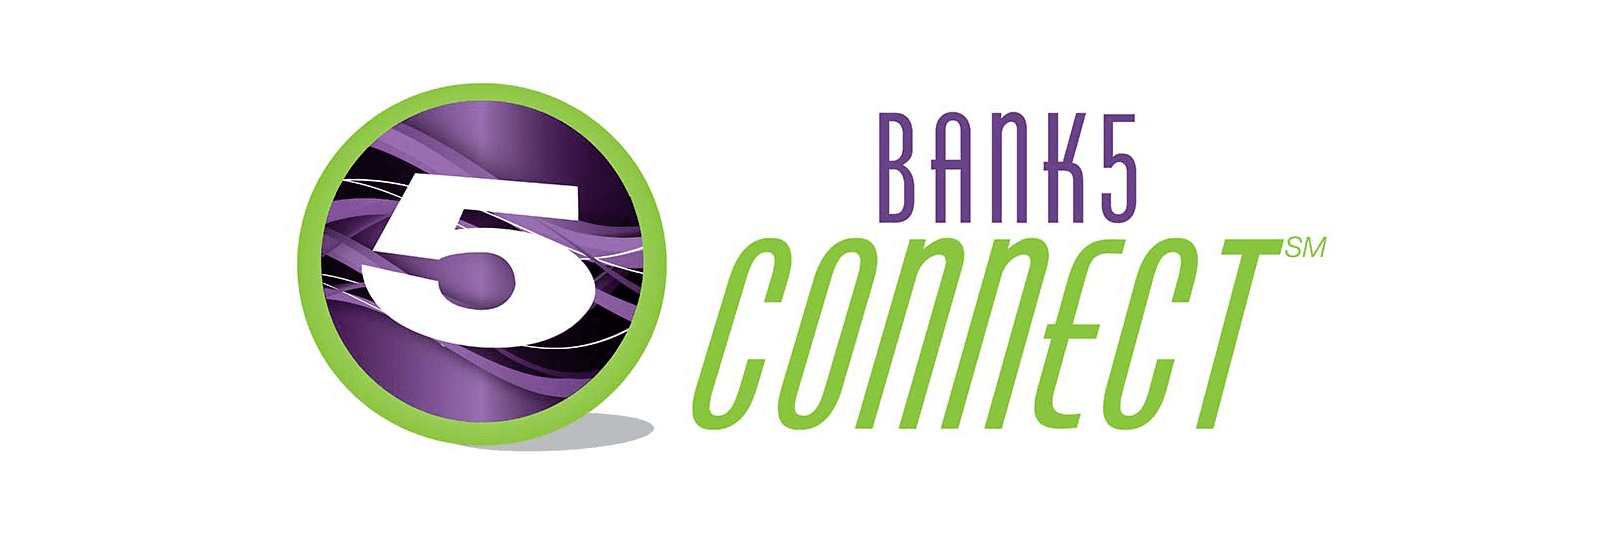 Purple Green Bank Logo - The 7 Best Free Checking Banks for 2019